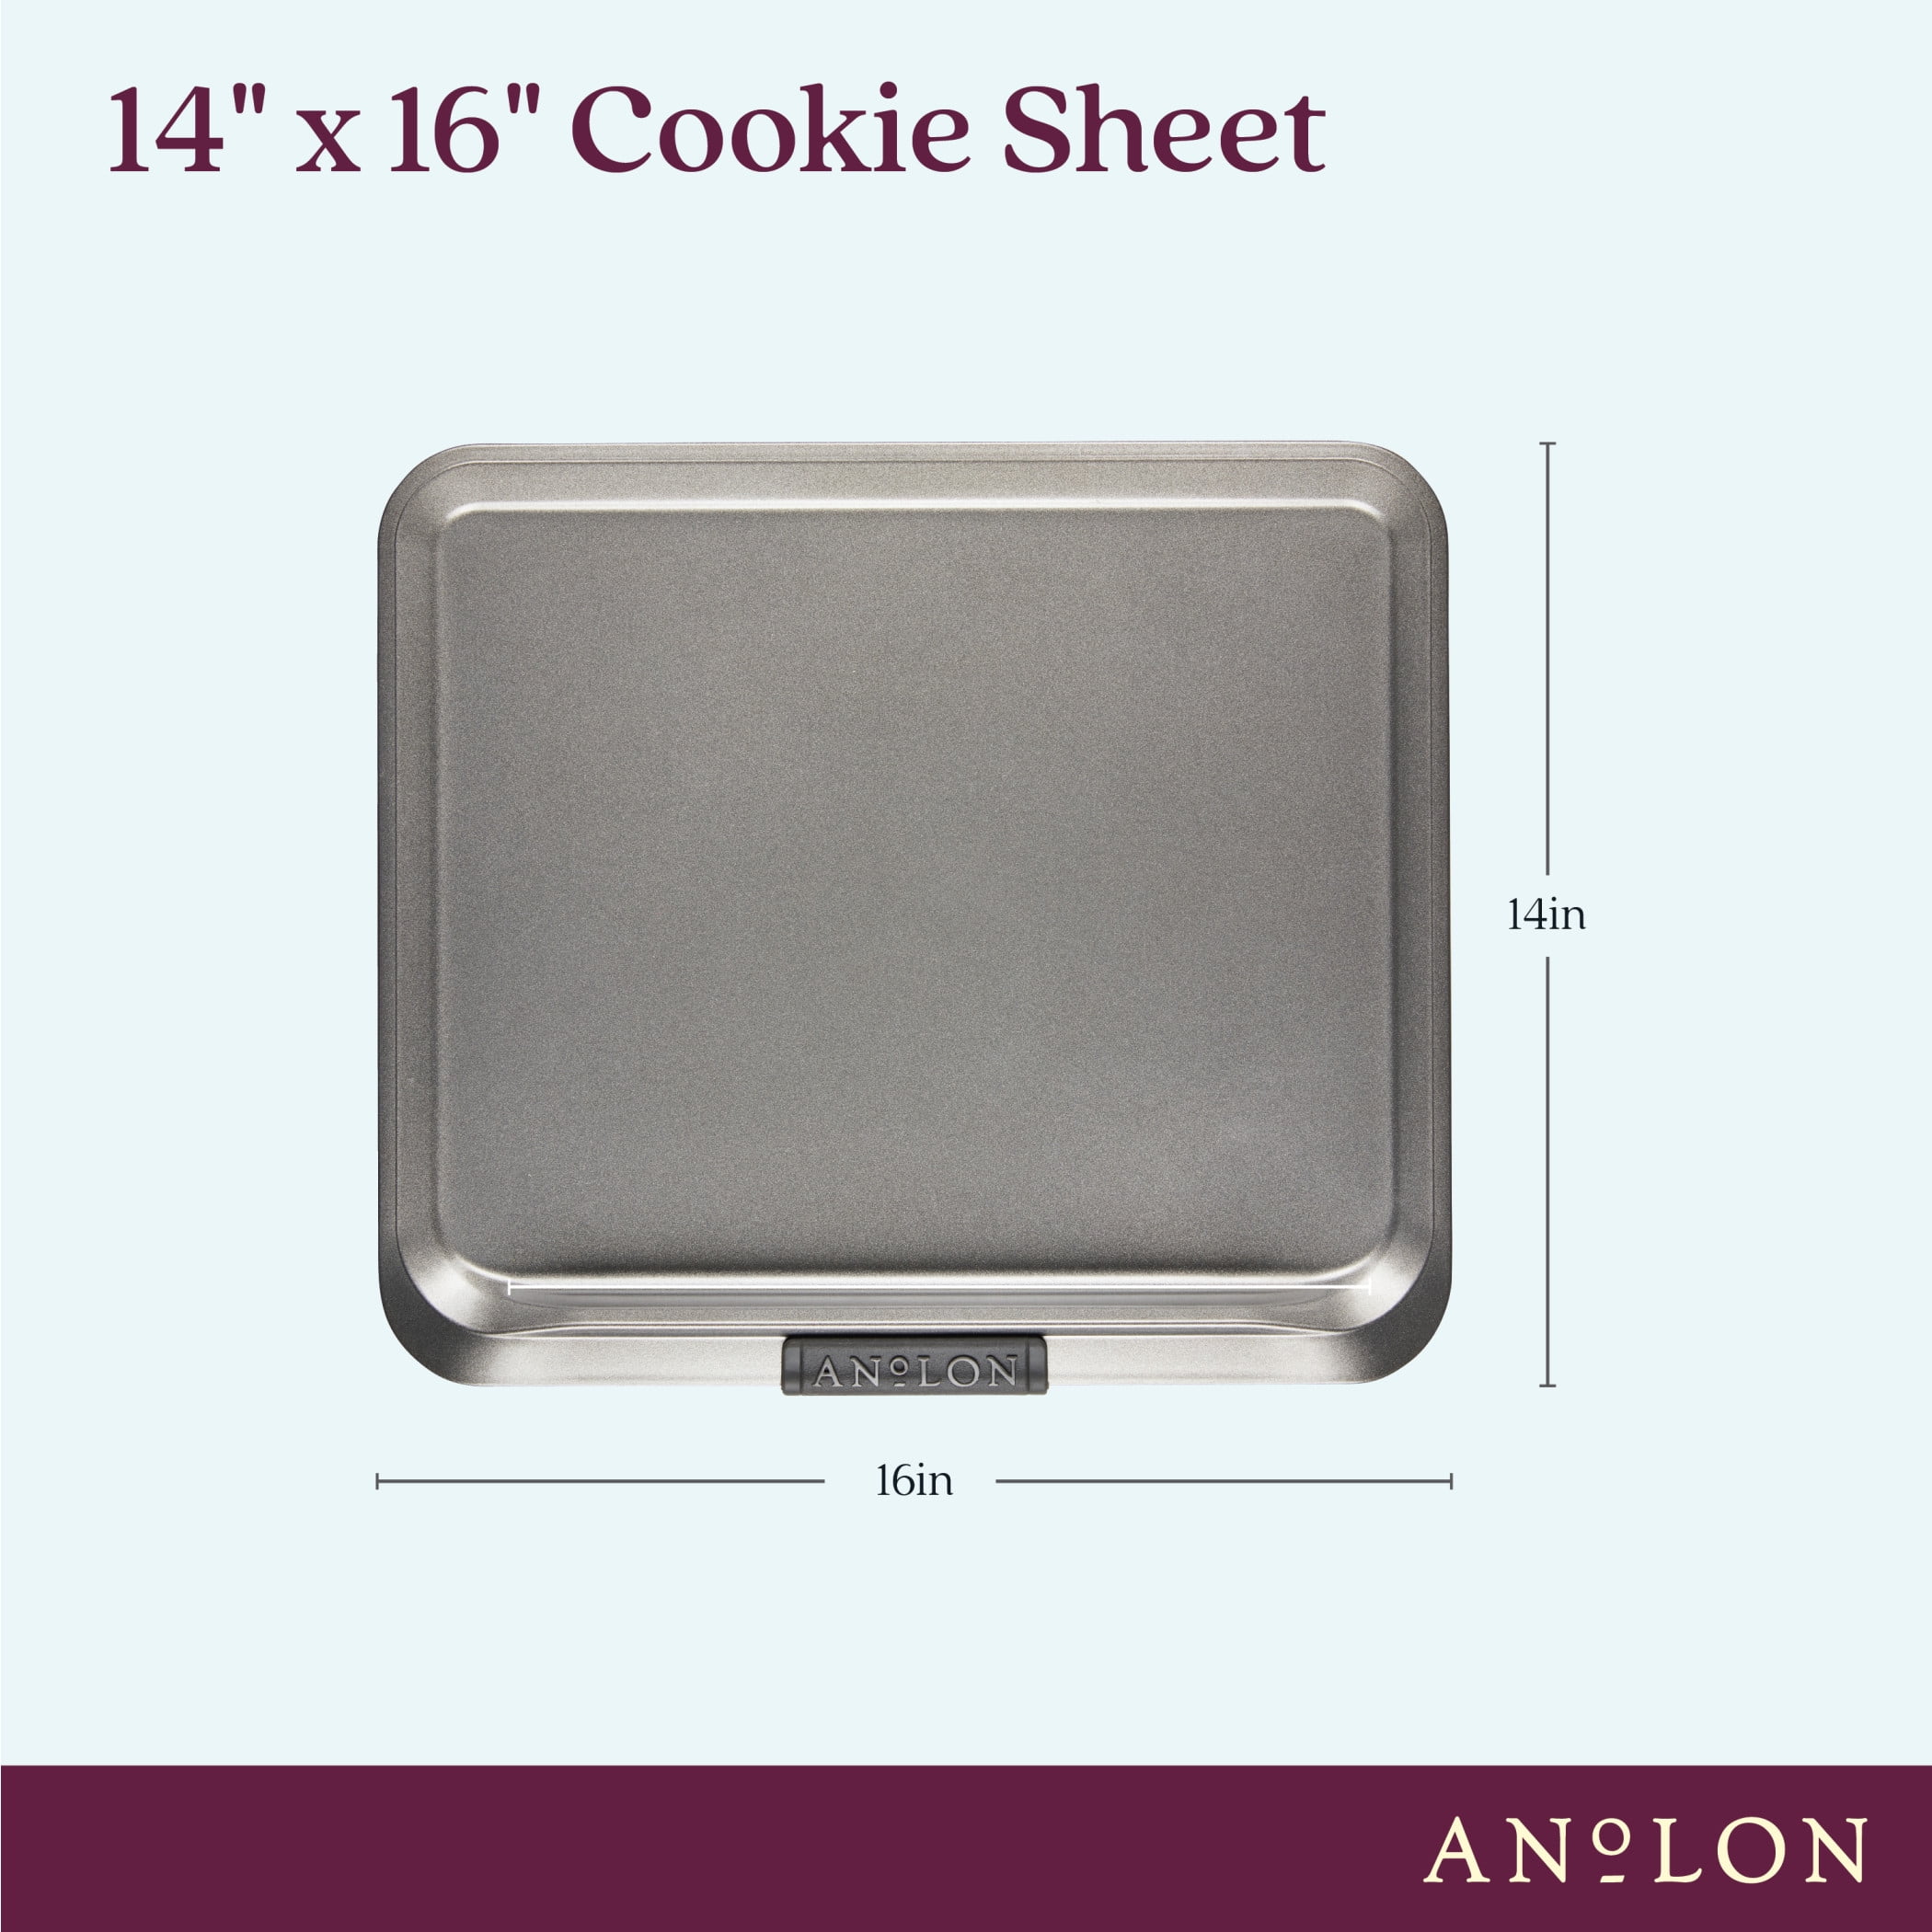  Anolon Gourmet Nonstick Bakeware Set with Nonstick Cookie Sheets  / Baking Sheets - 3 Piece, Graphite Gray: Home & Kitchen